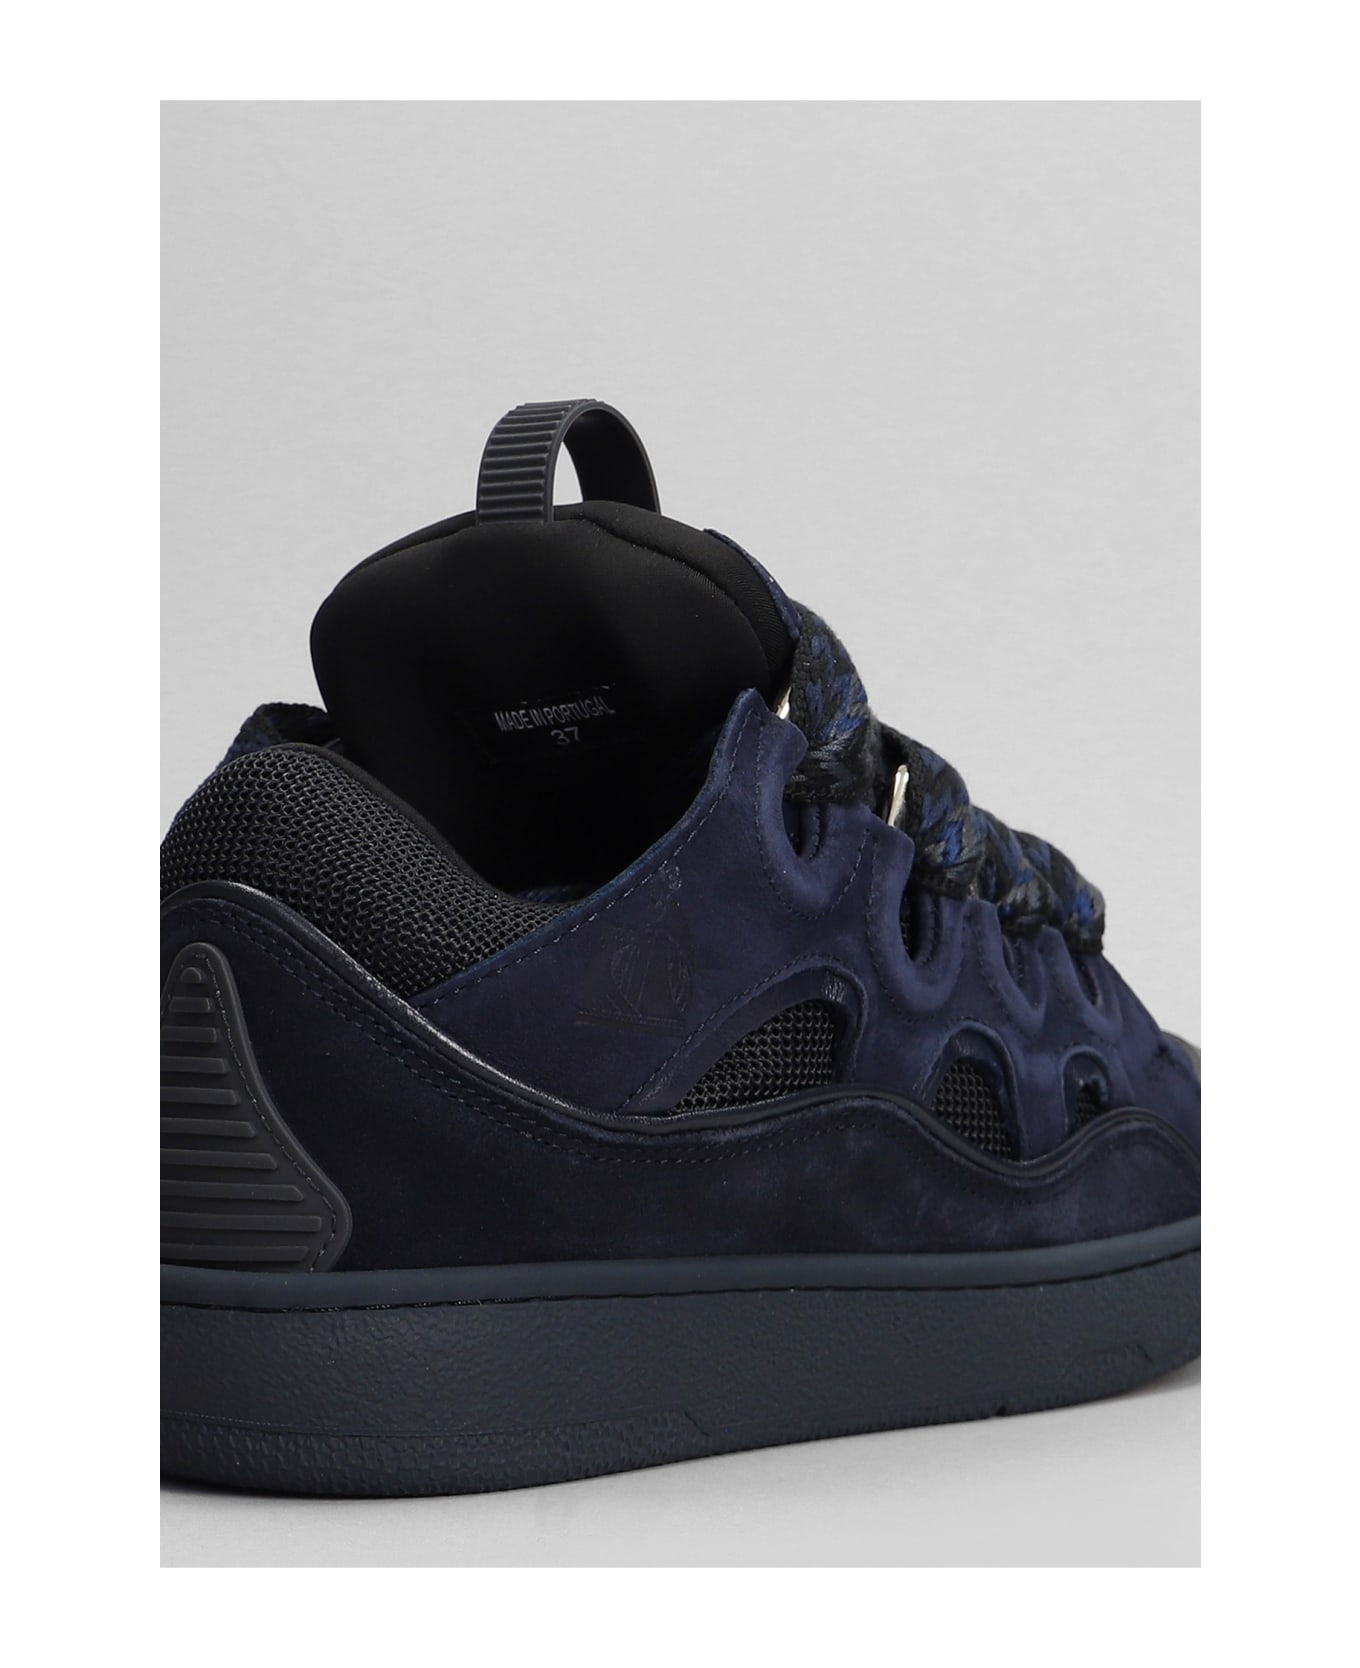 Lanvin Curb Sneakers In Blue Suede And Leather - blue スニーカー